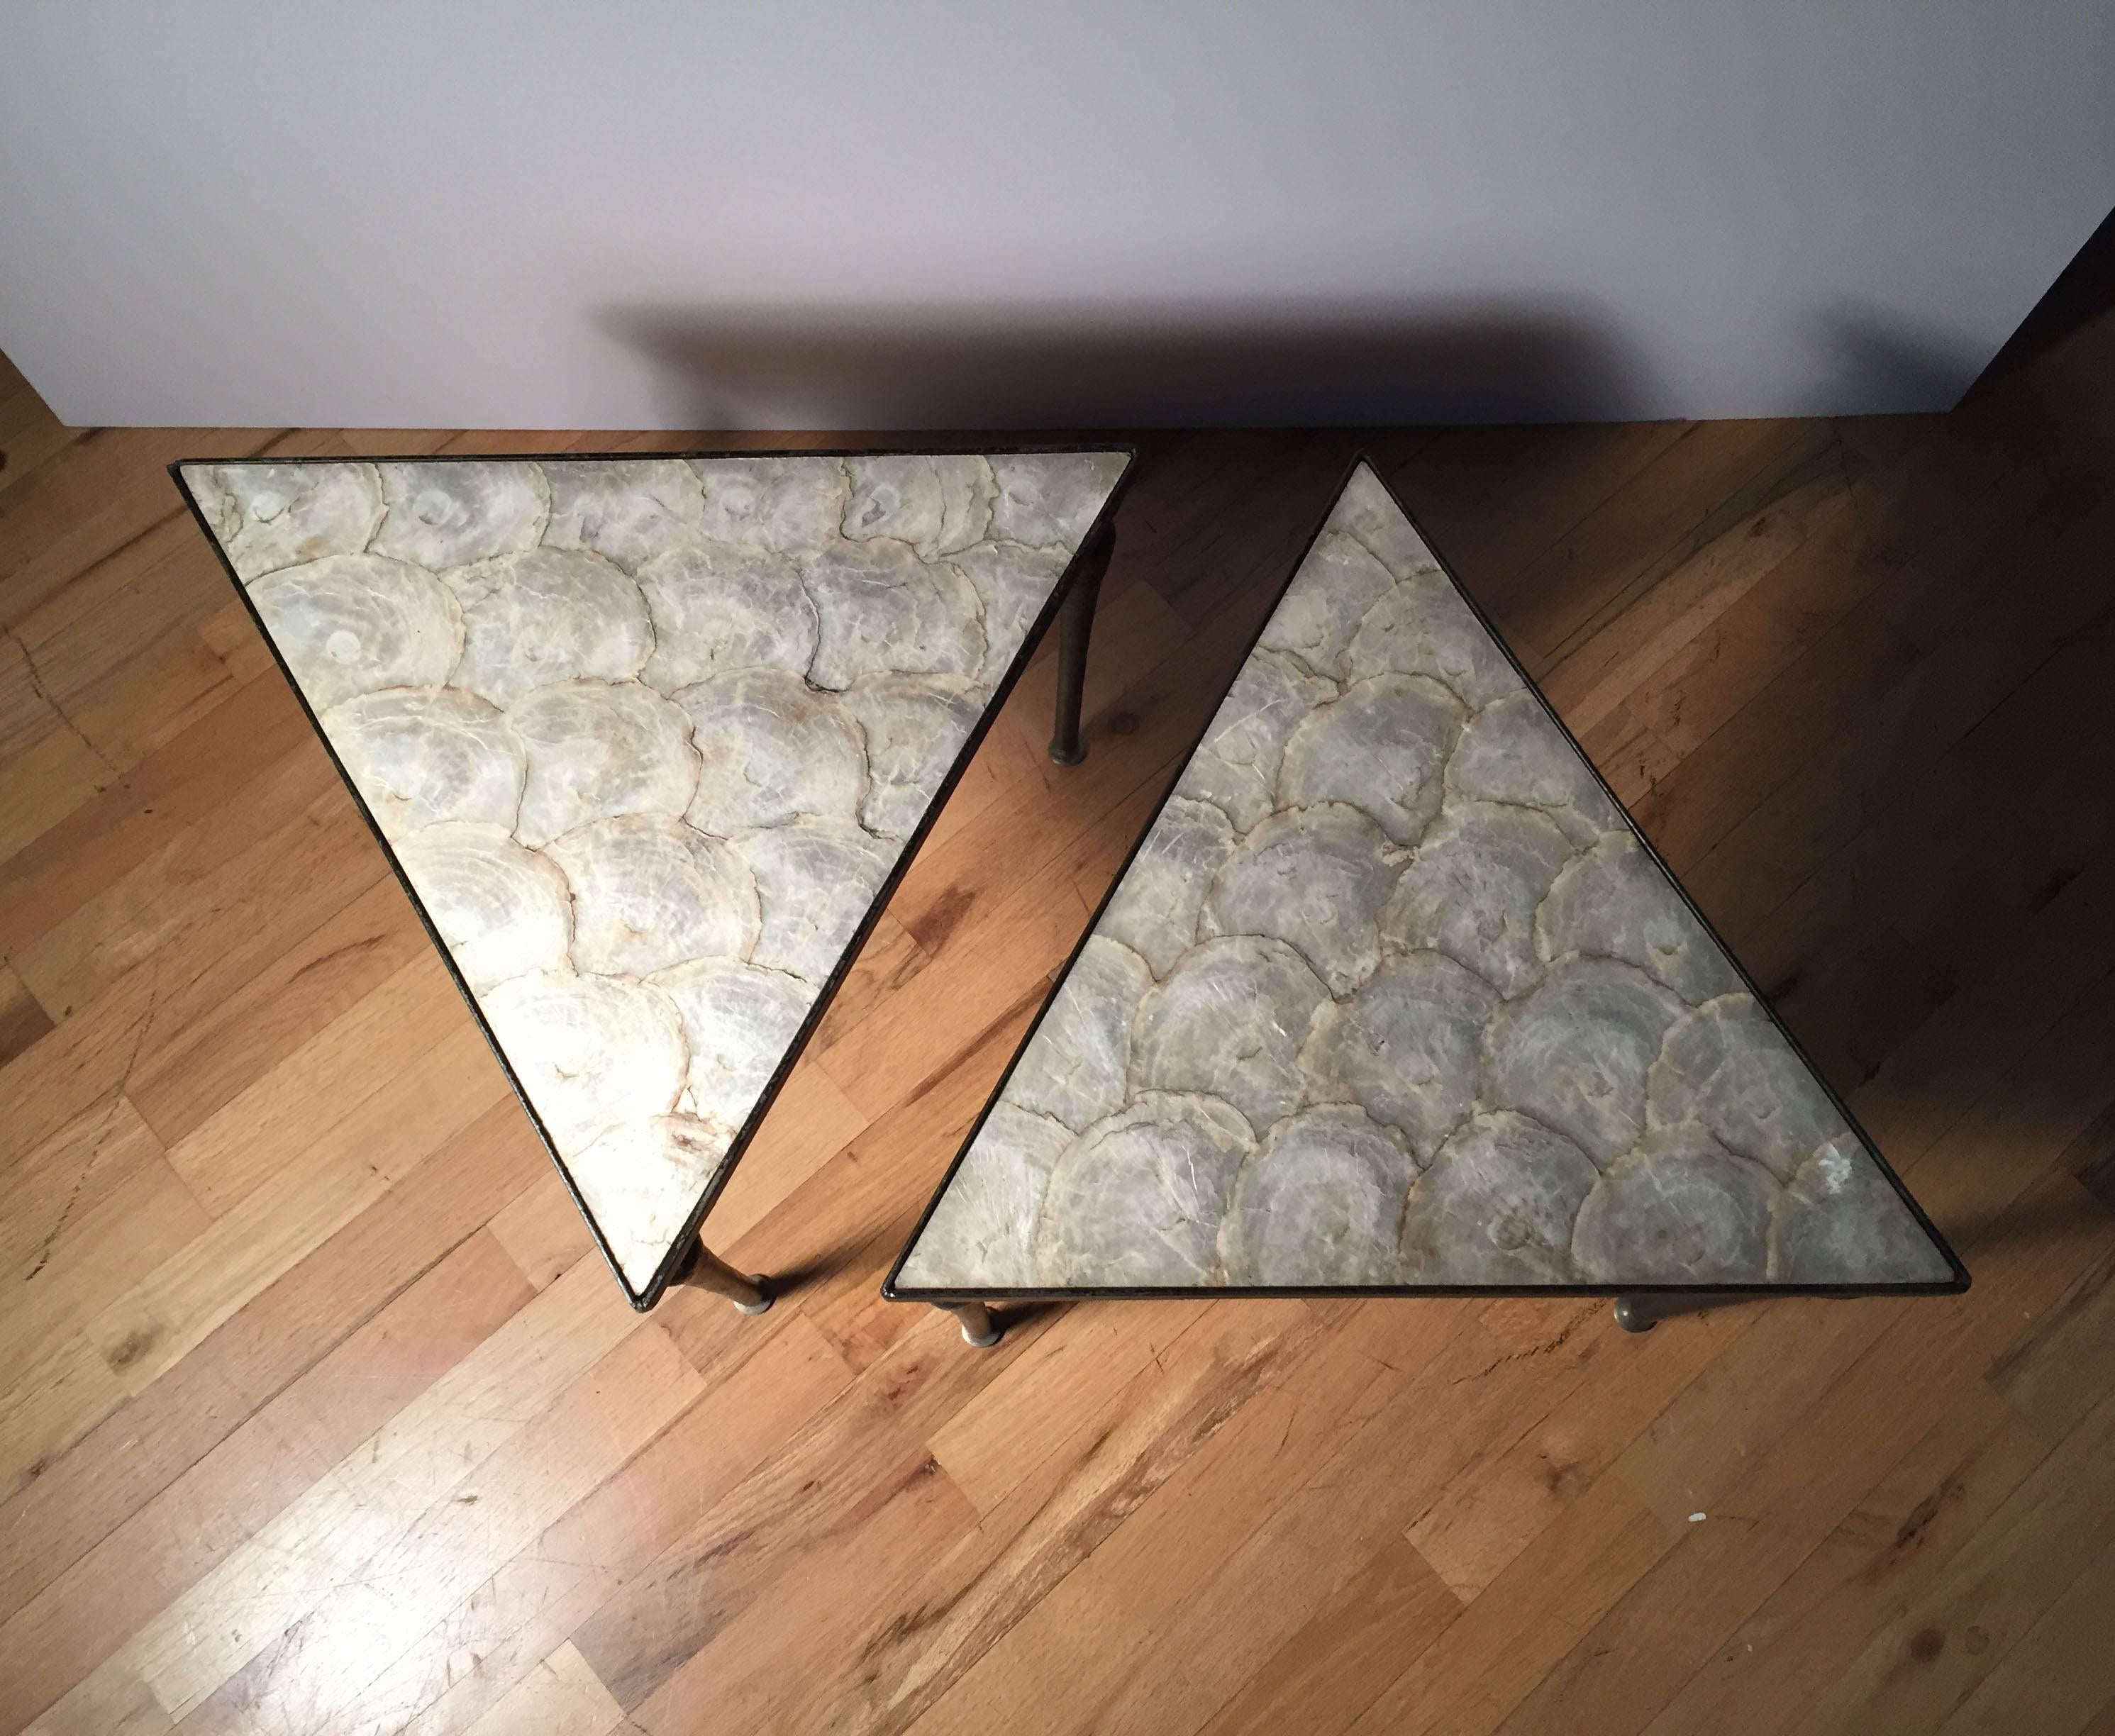 A vintage early pair of tables in style of Tony Duquette and Tommi Parzinger

I believe these were custom pieces for an interior. Designer and maker unknown.
We also have a coffee table to match.